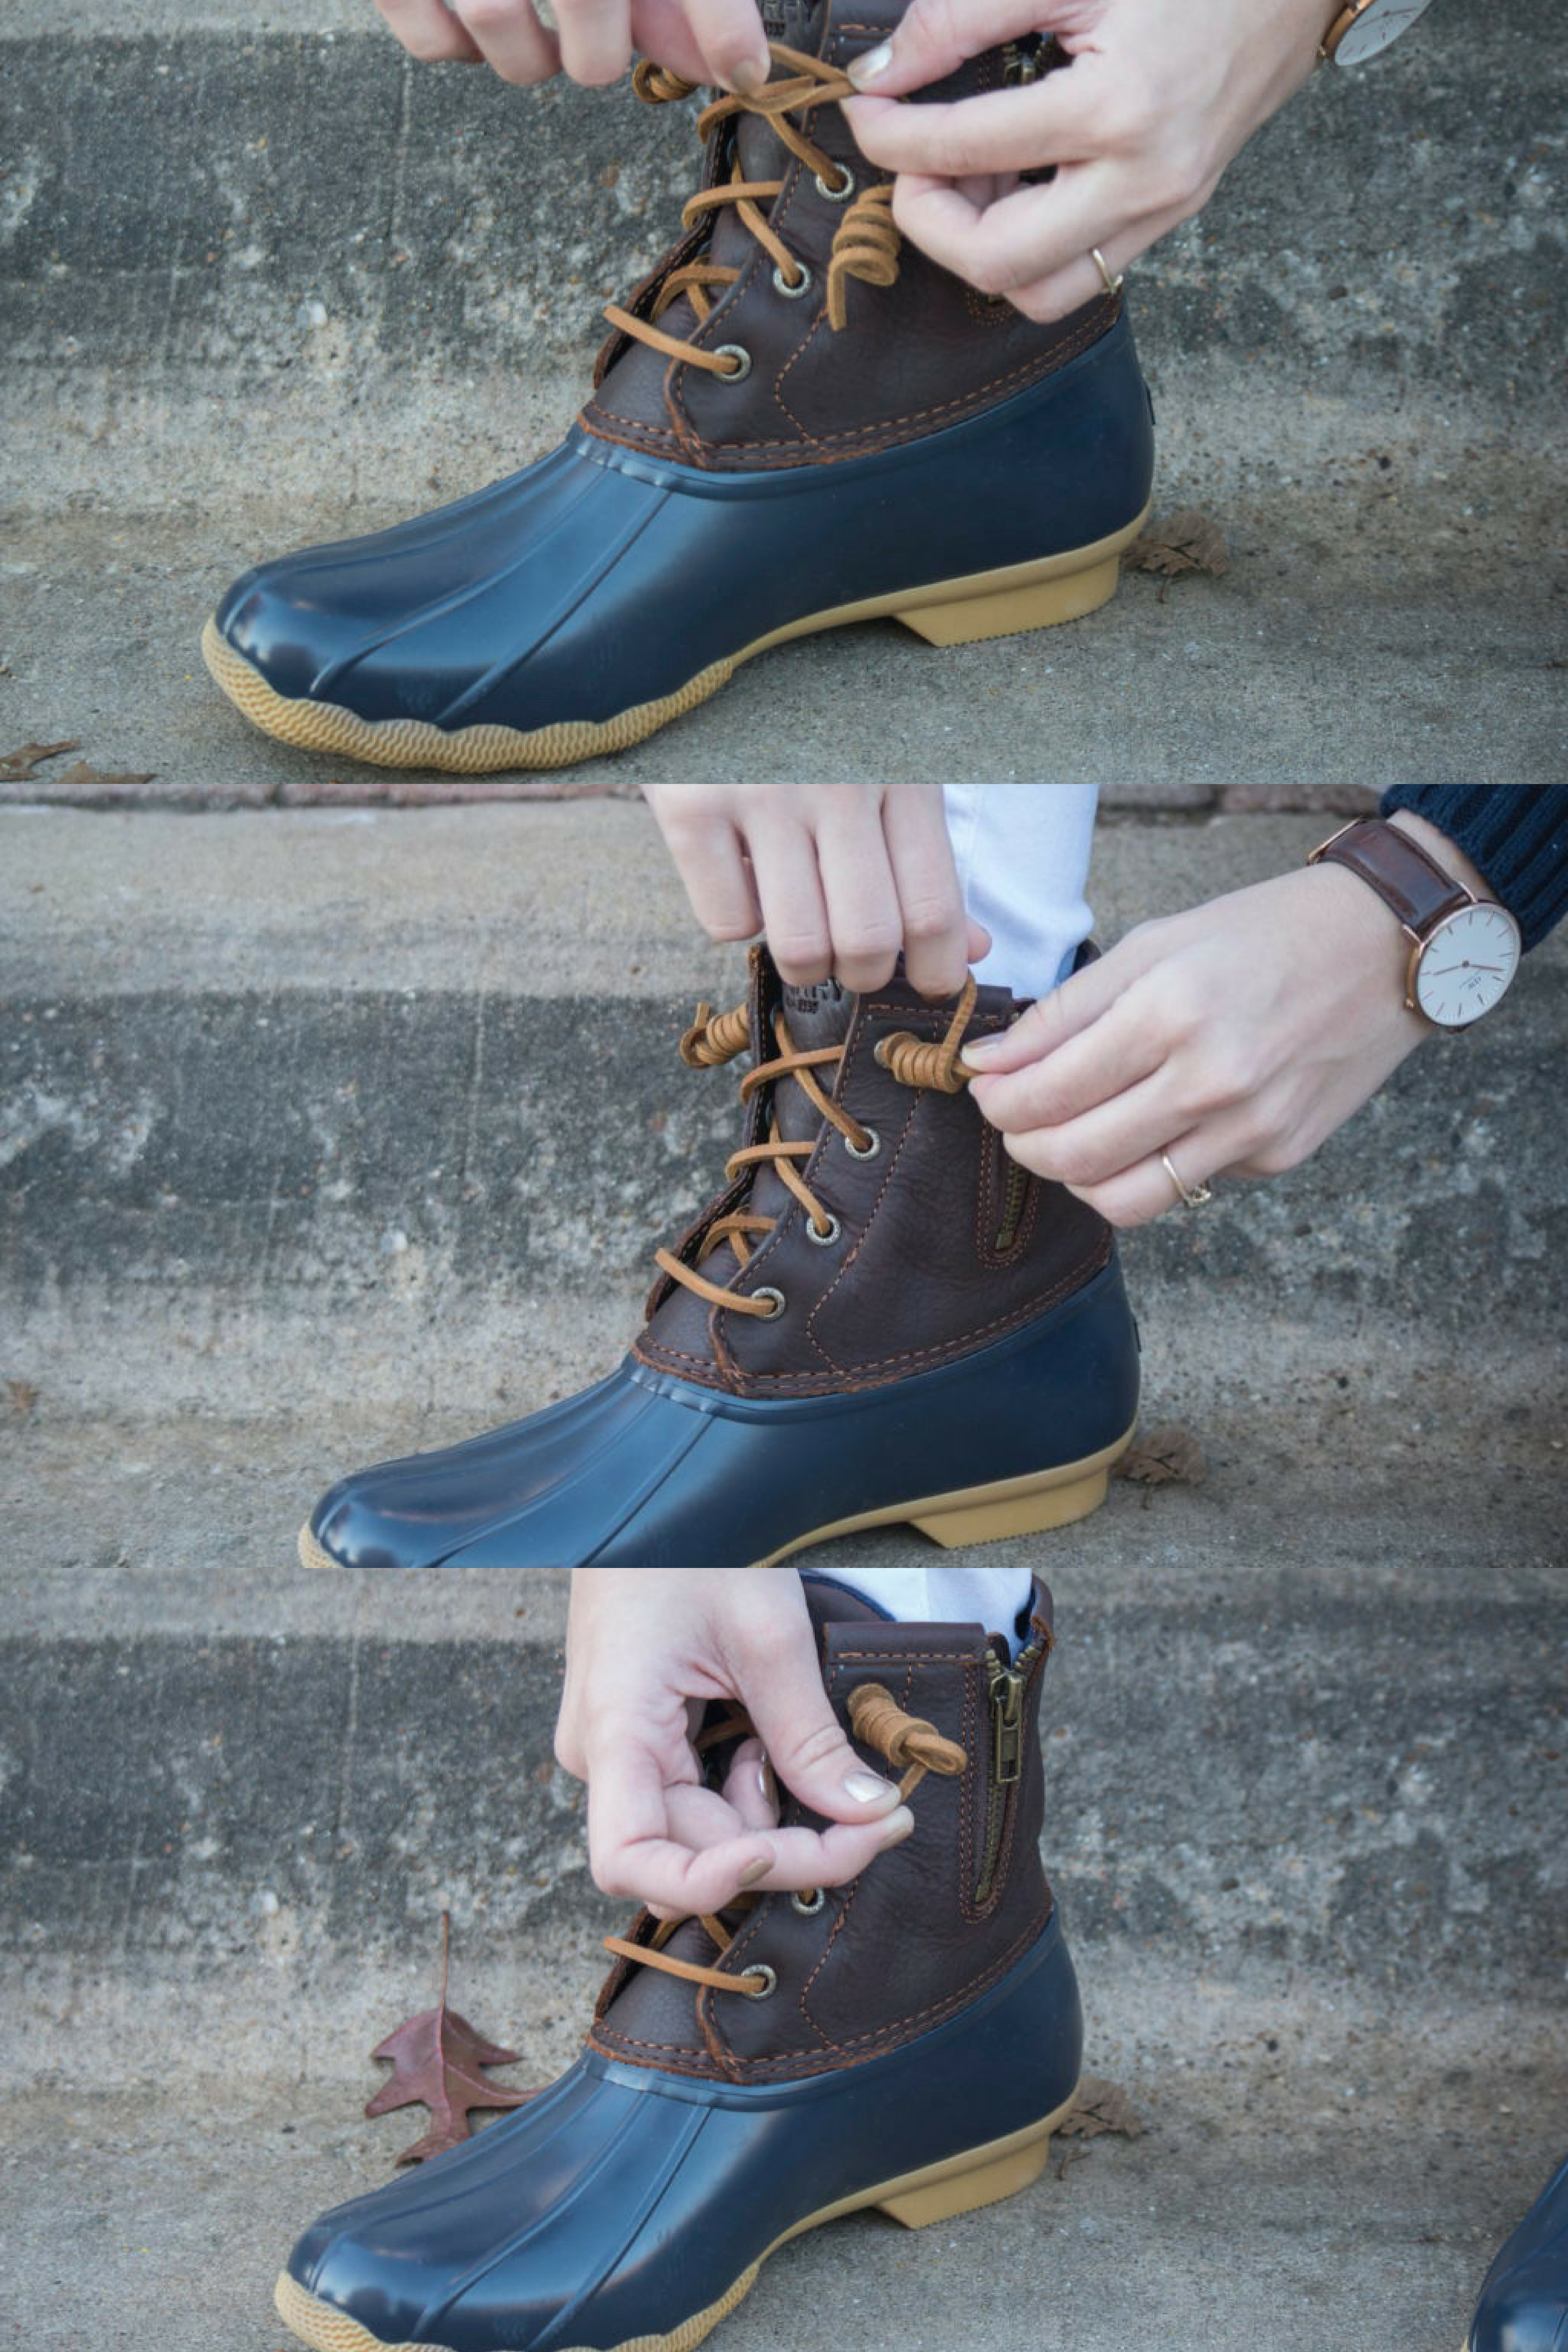 How To Tie Duck Boots Step by Step 